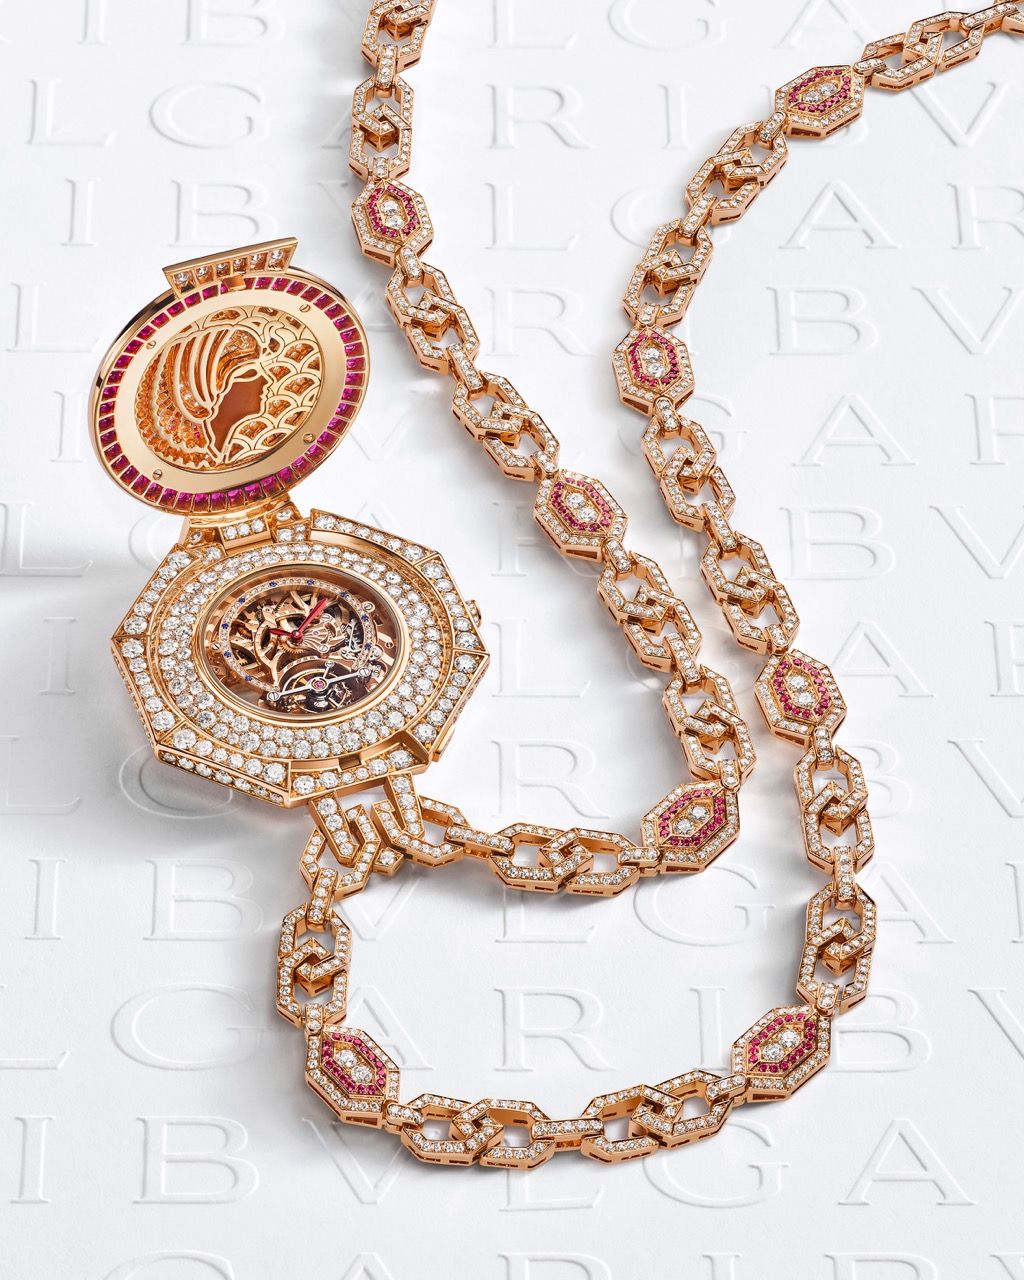 This piece is born on a rose gold chain matching the necklace which features diamonds and brilliant-cut rubies